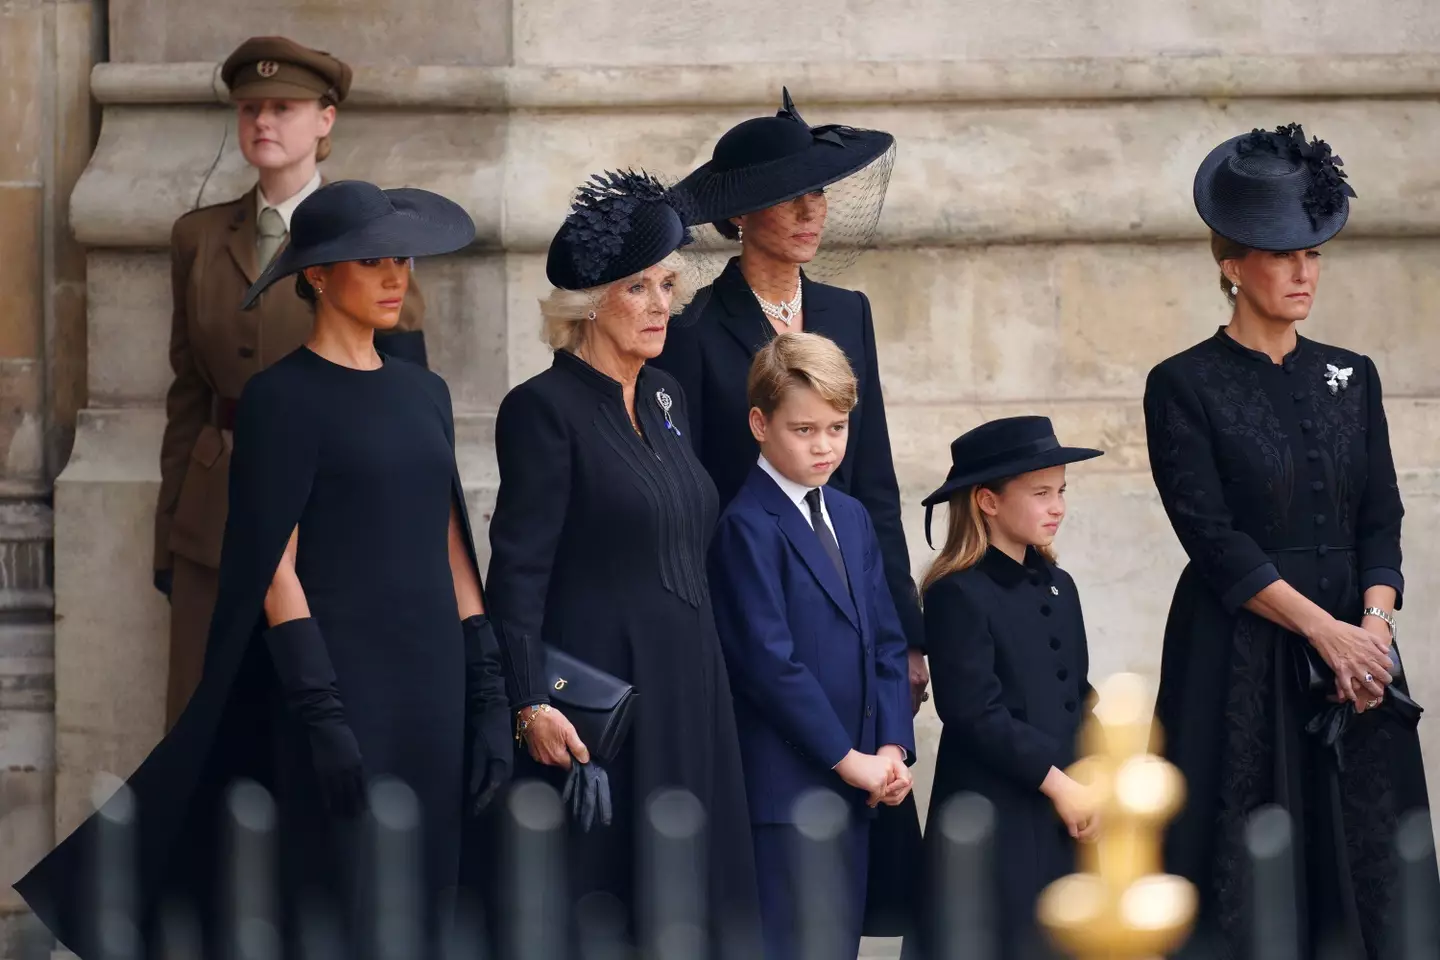 Prince George and Princess Charlotte were seen at the Queen's funeral.